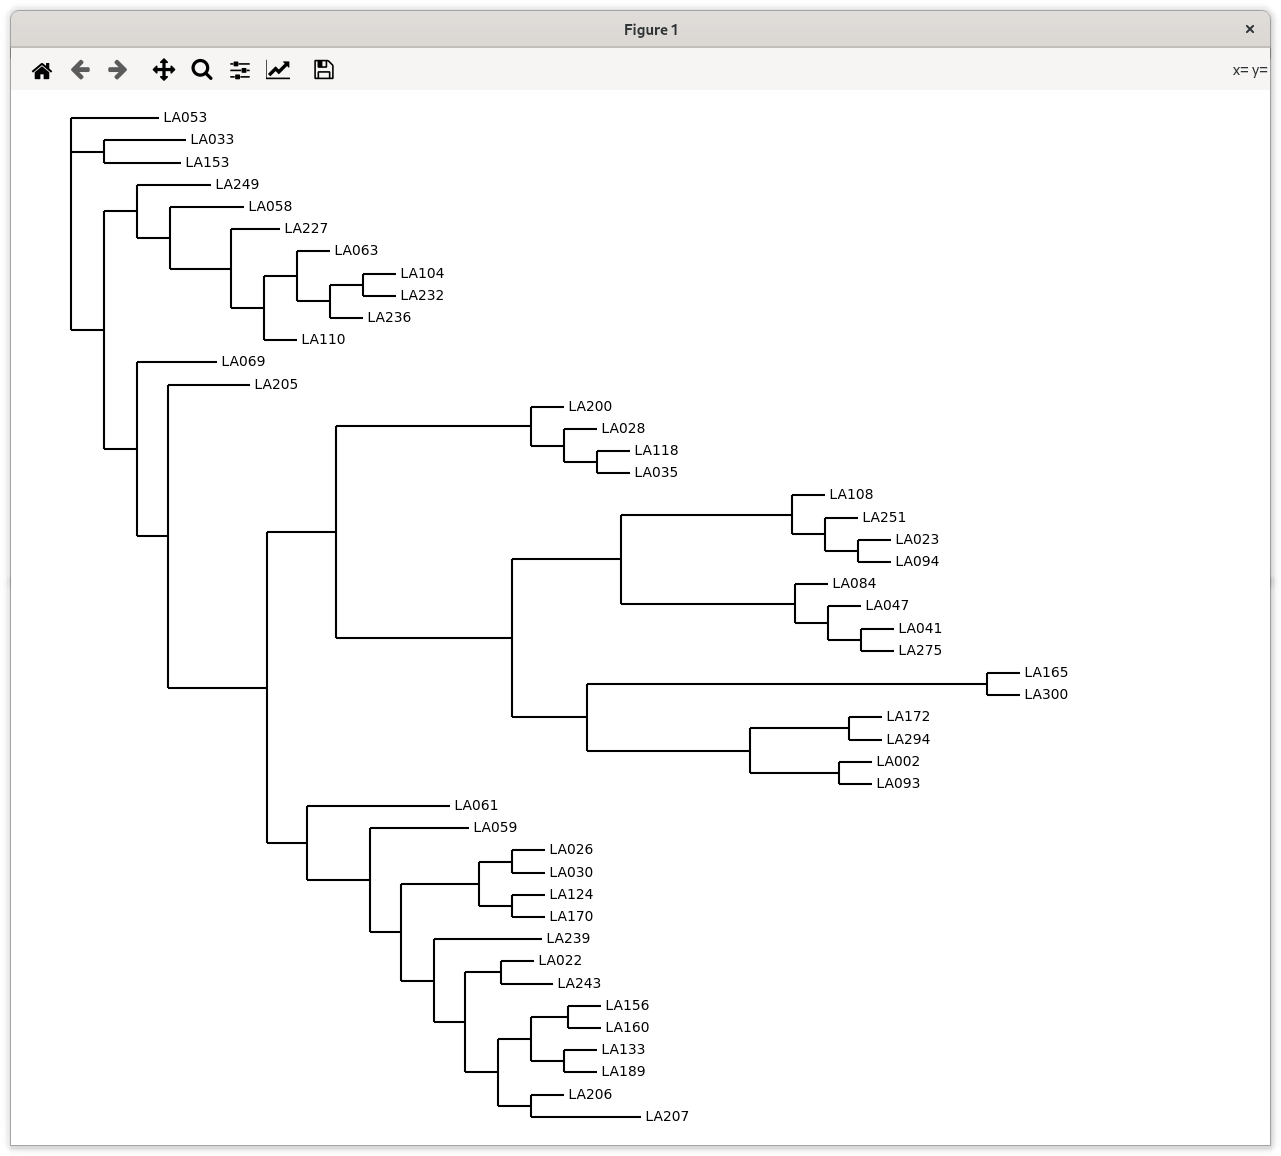 Phylogenetic tree from raw SKA output